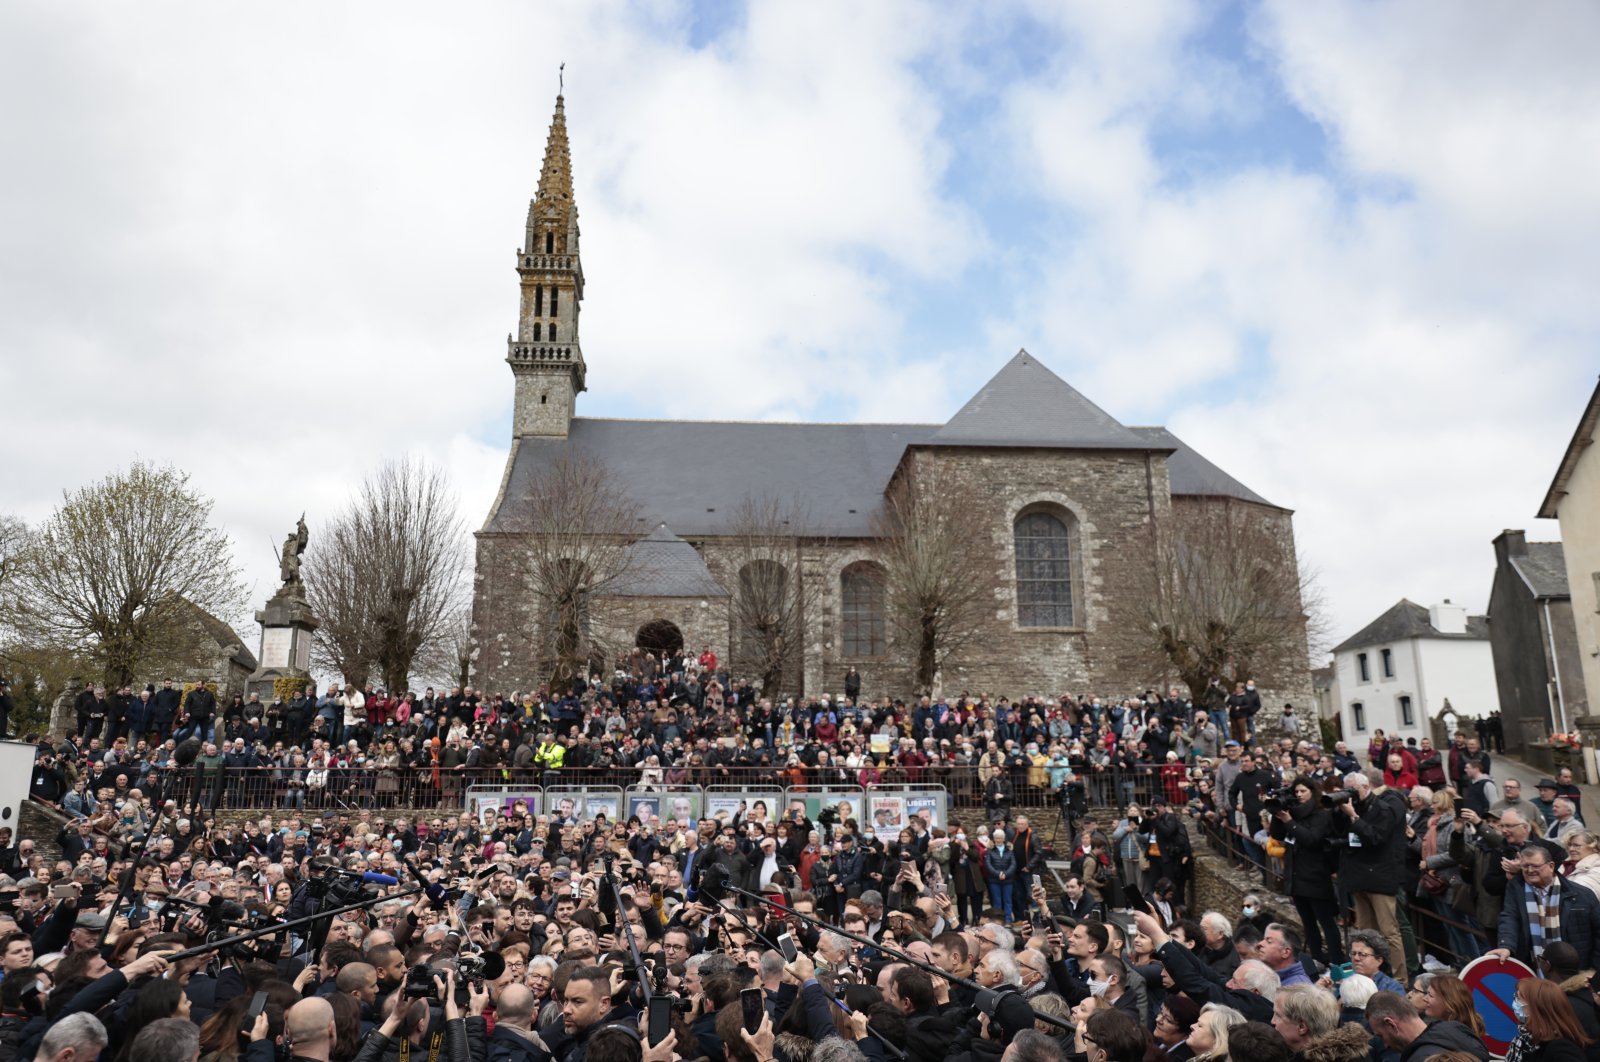 A crowd watches French President Emmanuel Macron arriving in the village of Spezet, Brittany, France, April 5, 2022. (AP Photo)